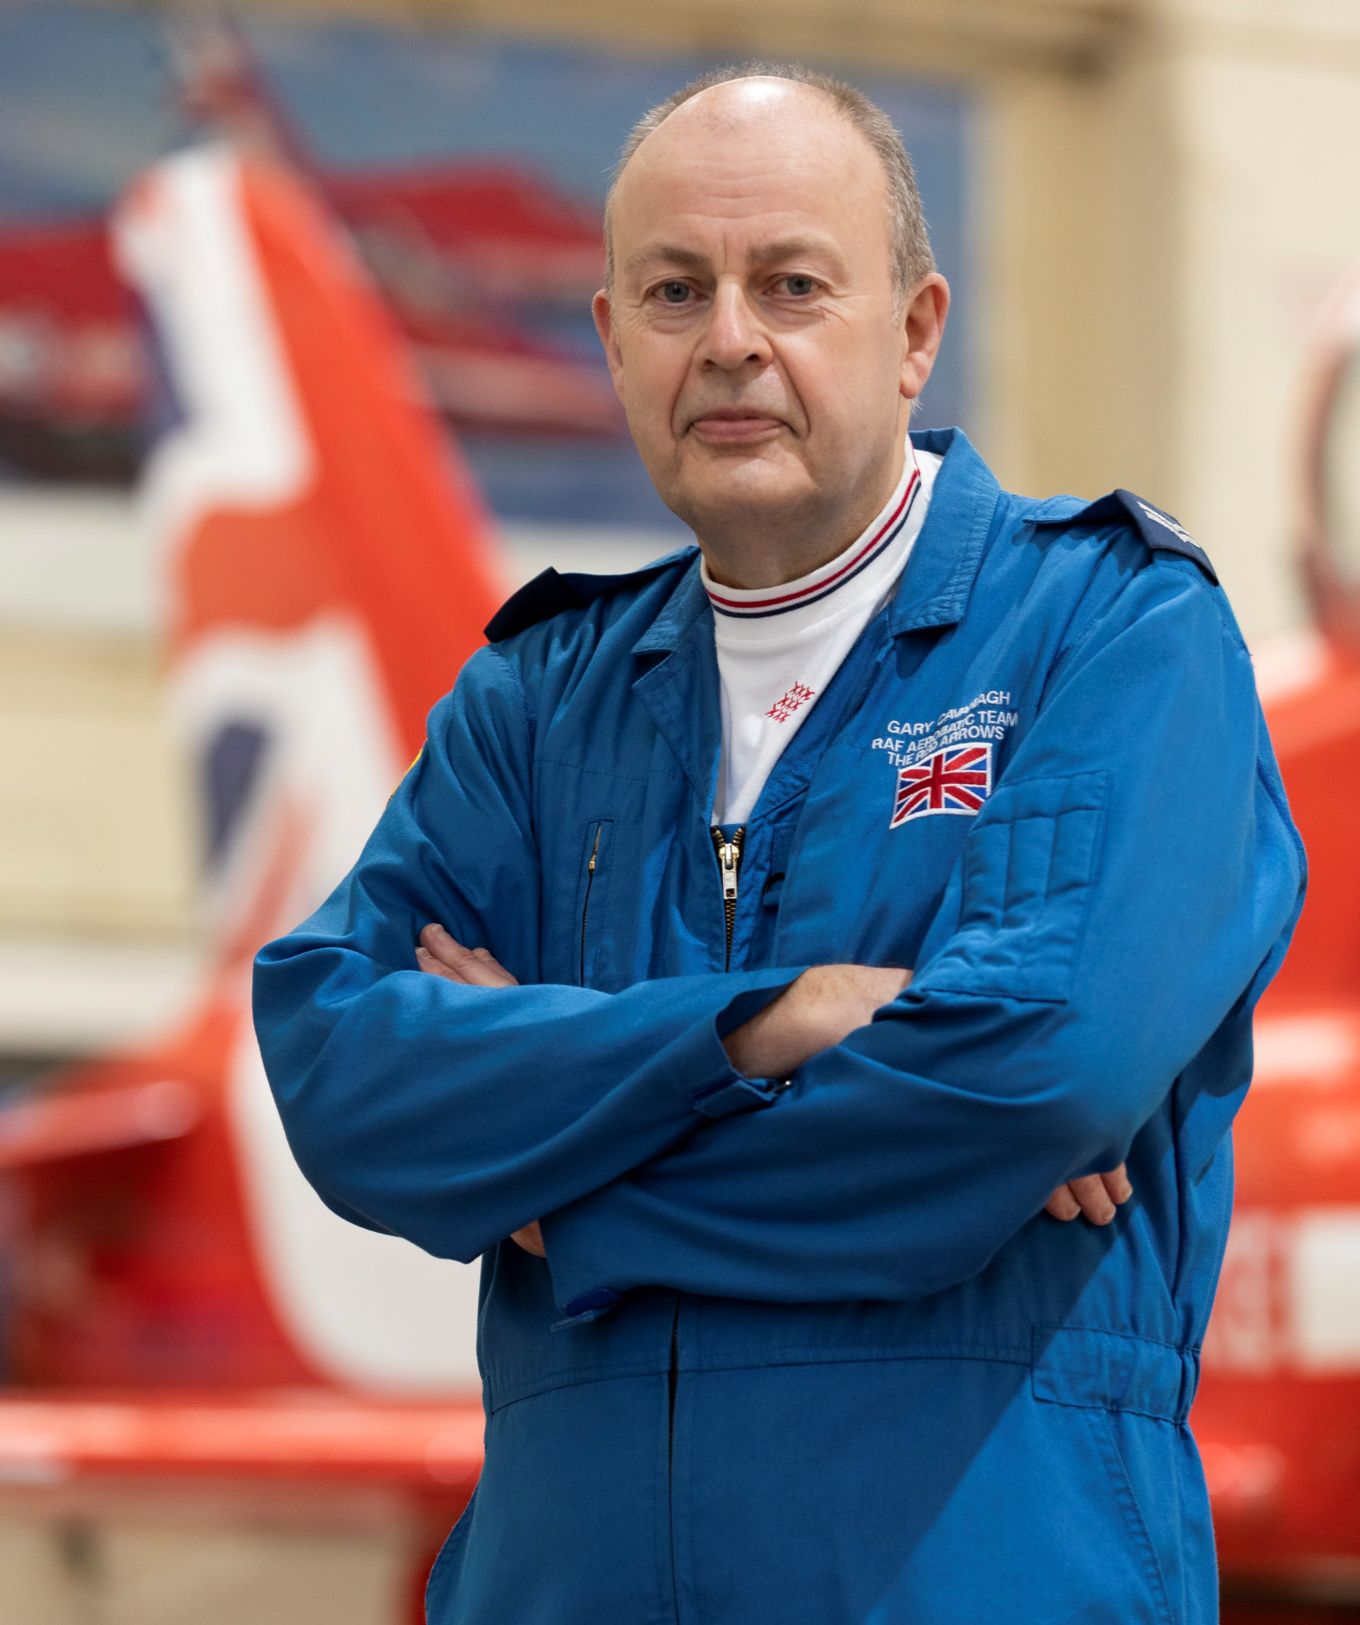 Corporal Gary Cavanagh stood next to Red Arrows jet.